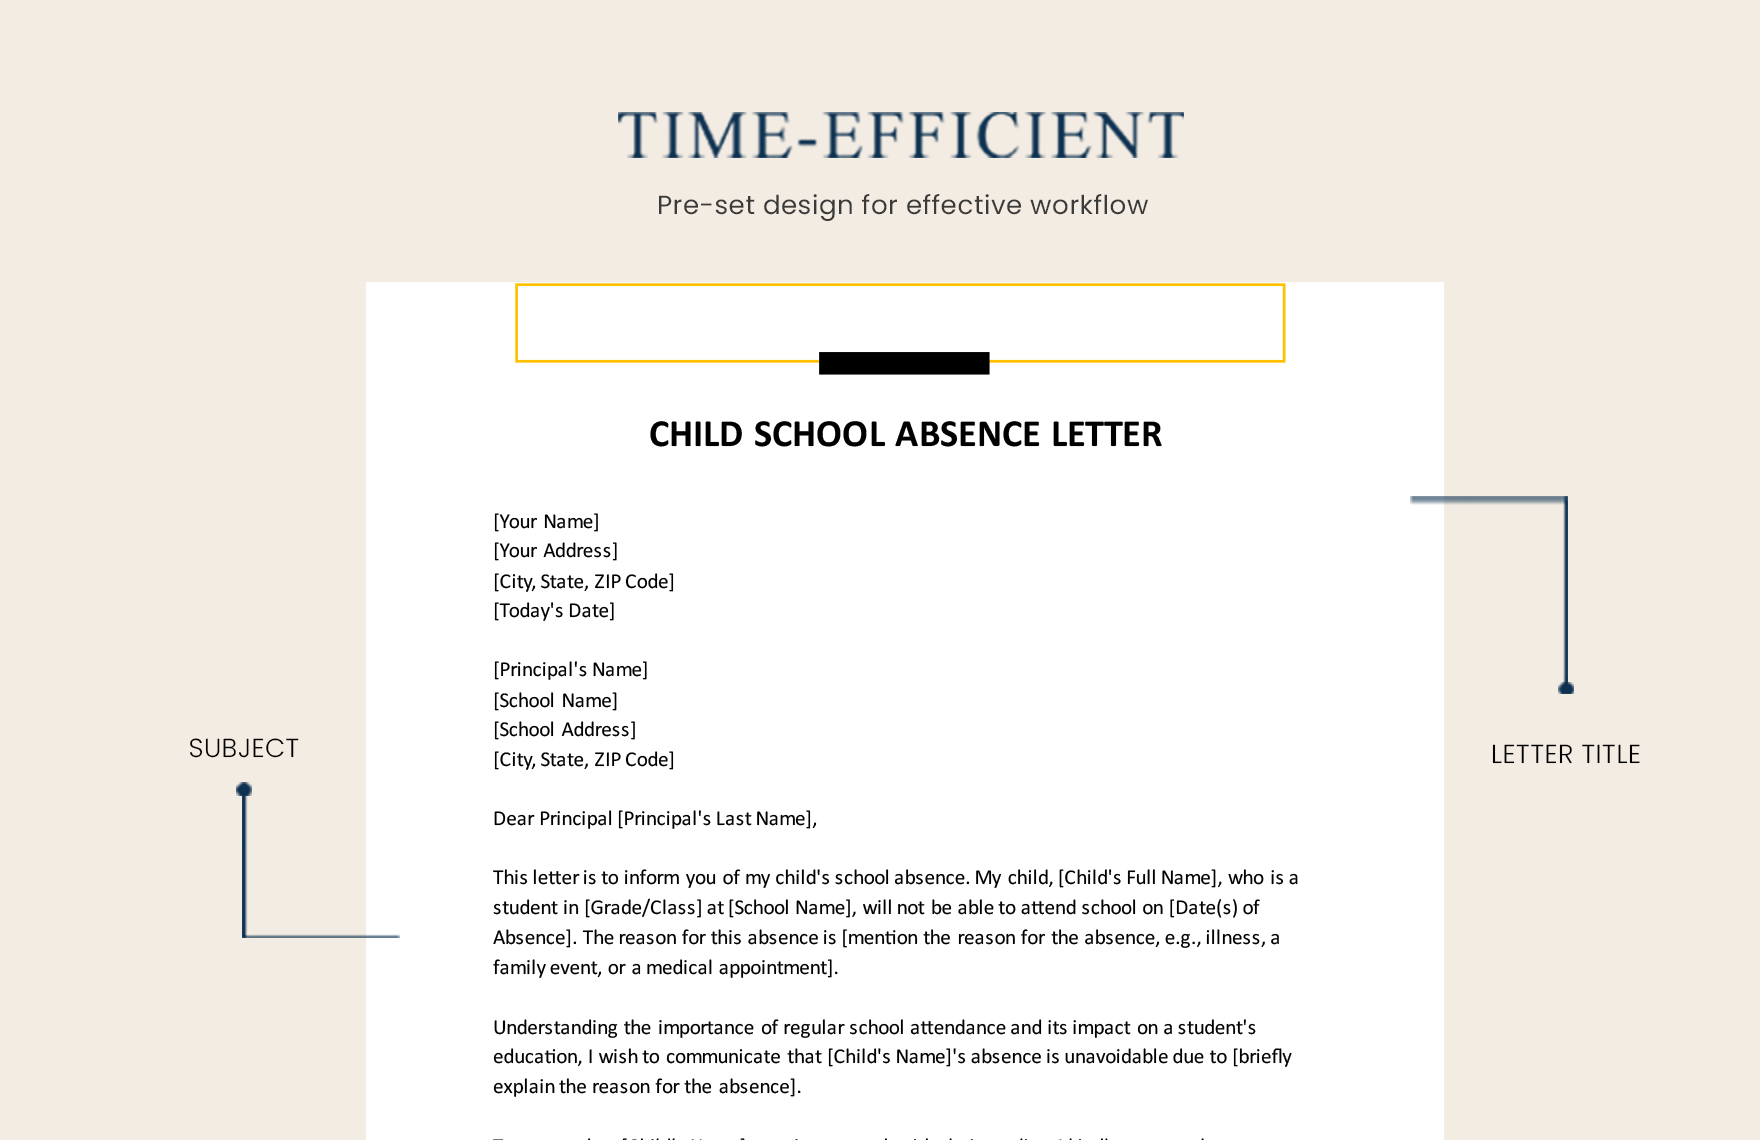 Child School Absence Letter